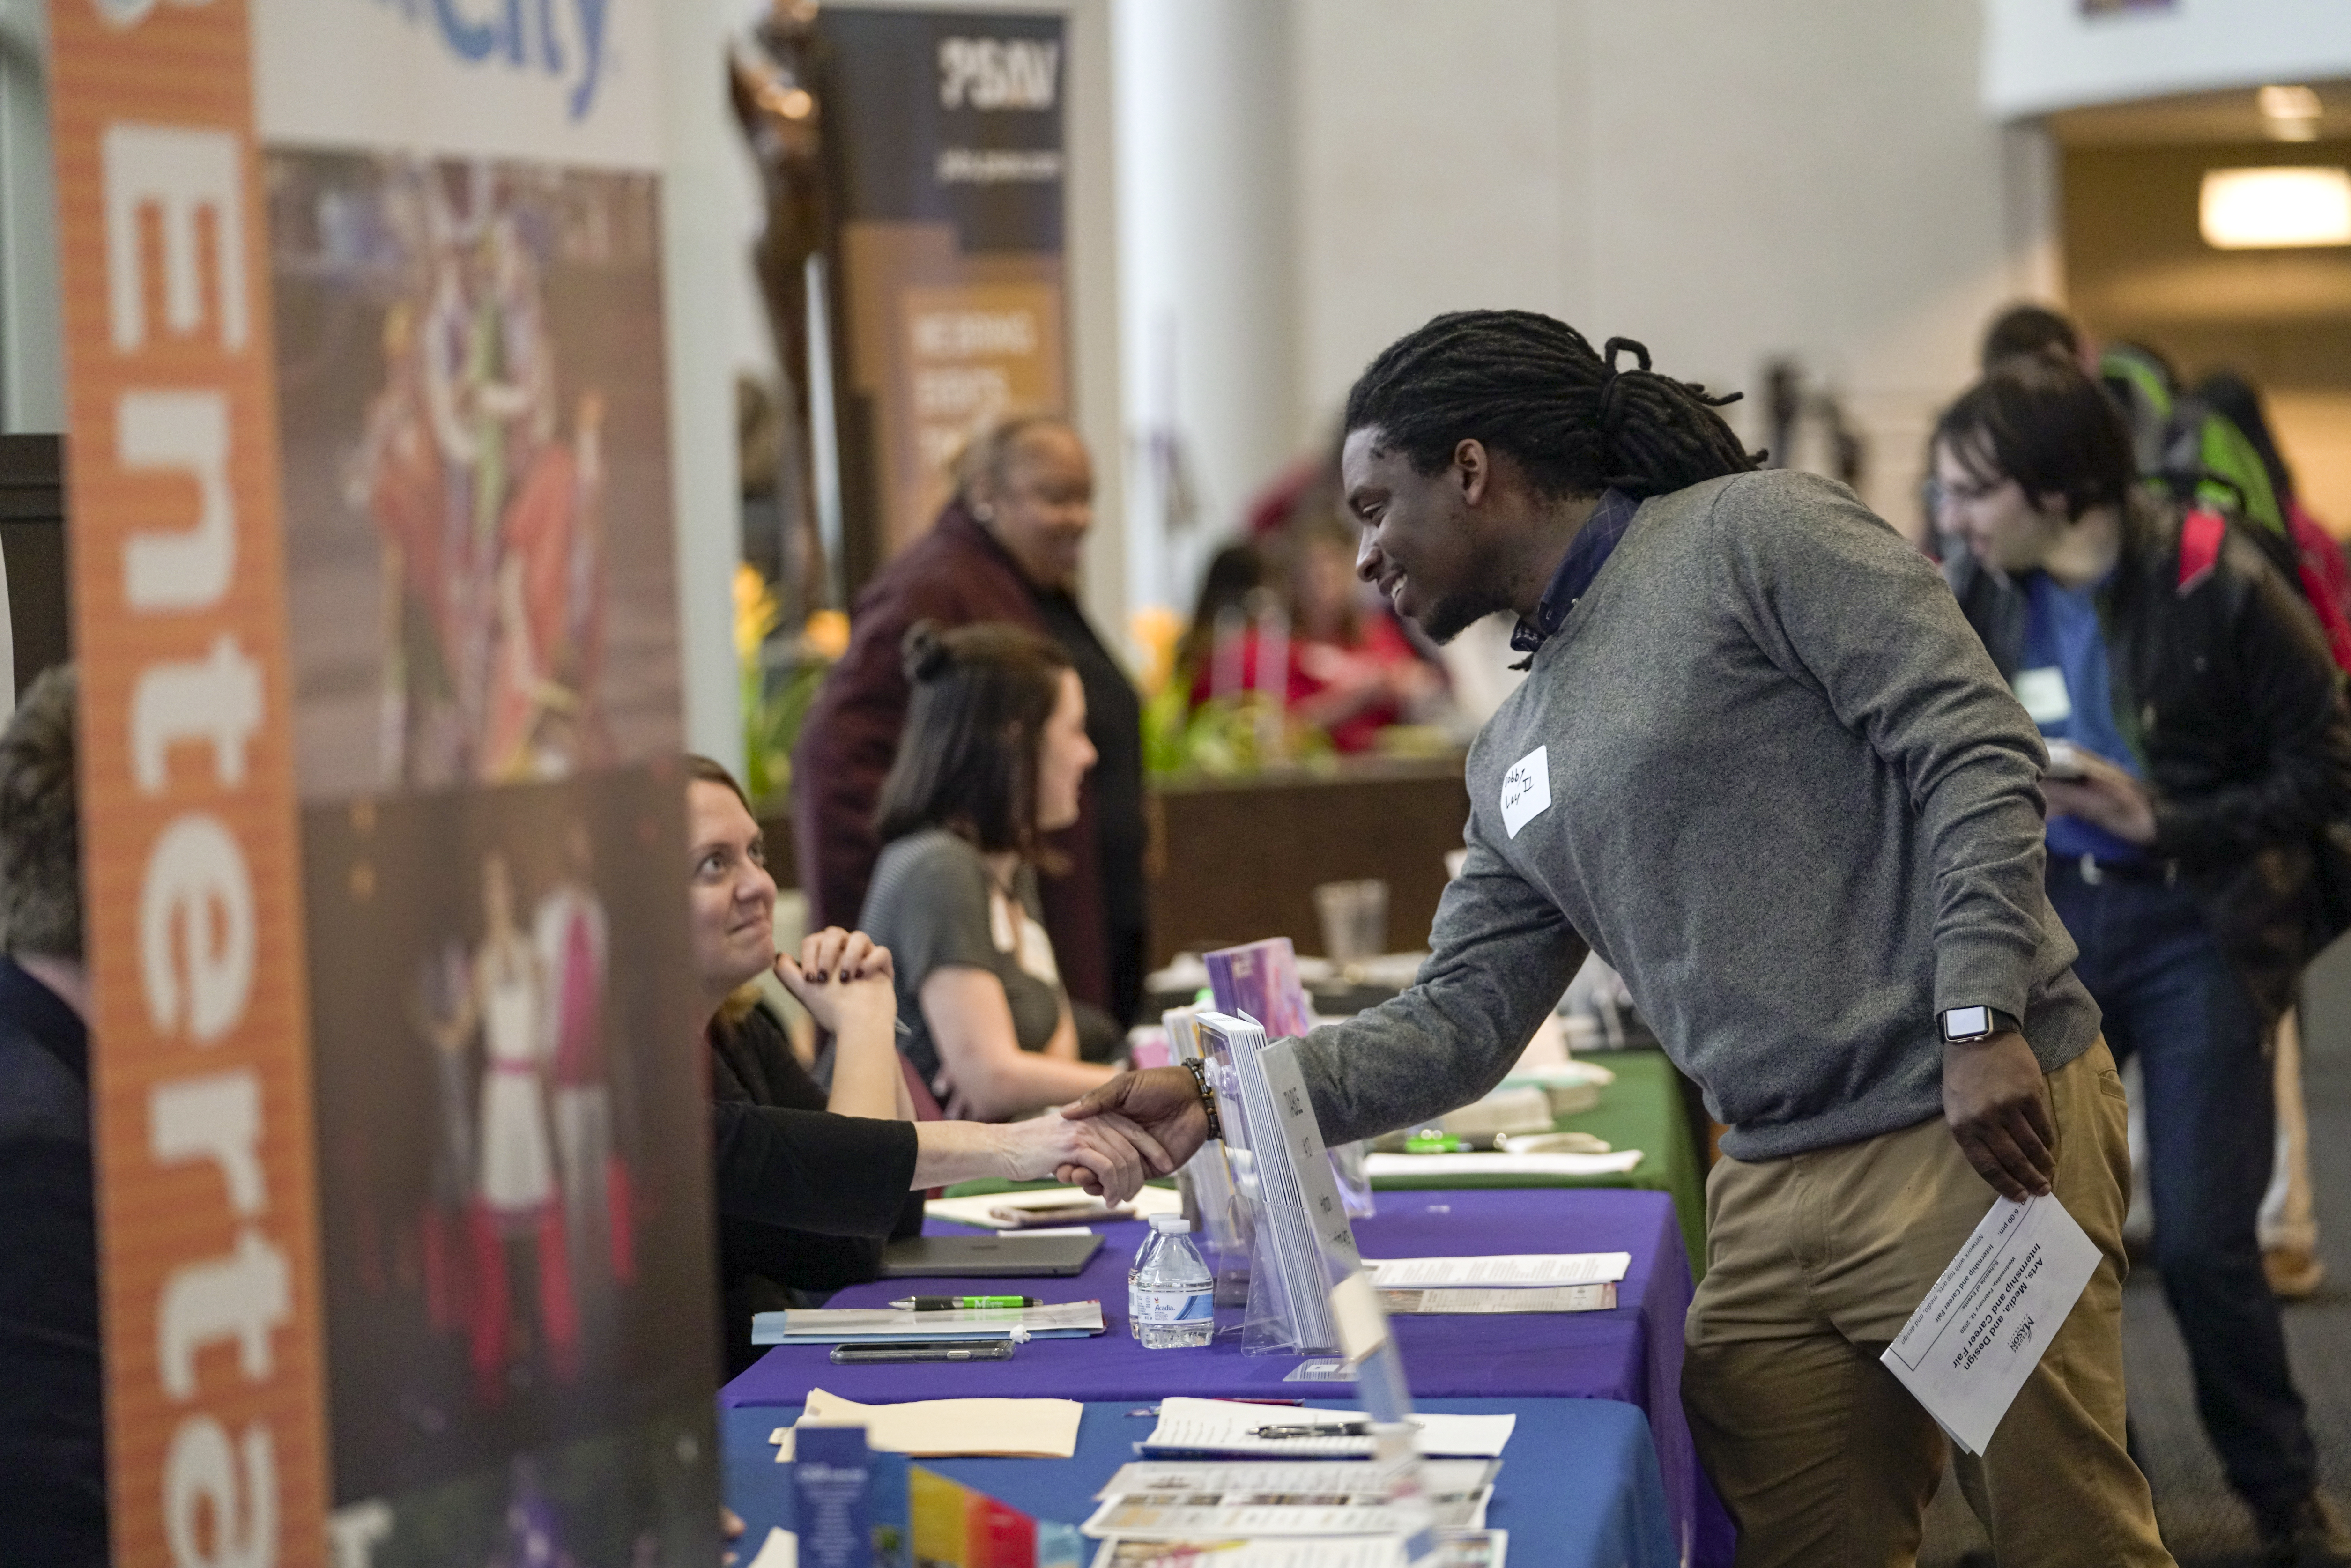 Arts Management student meets with prospective employers at annual Creative Careers Week event.